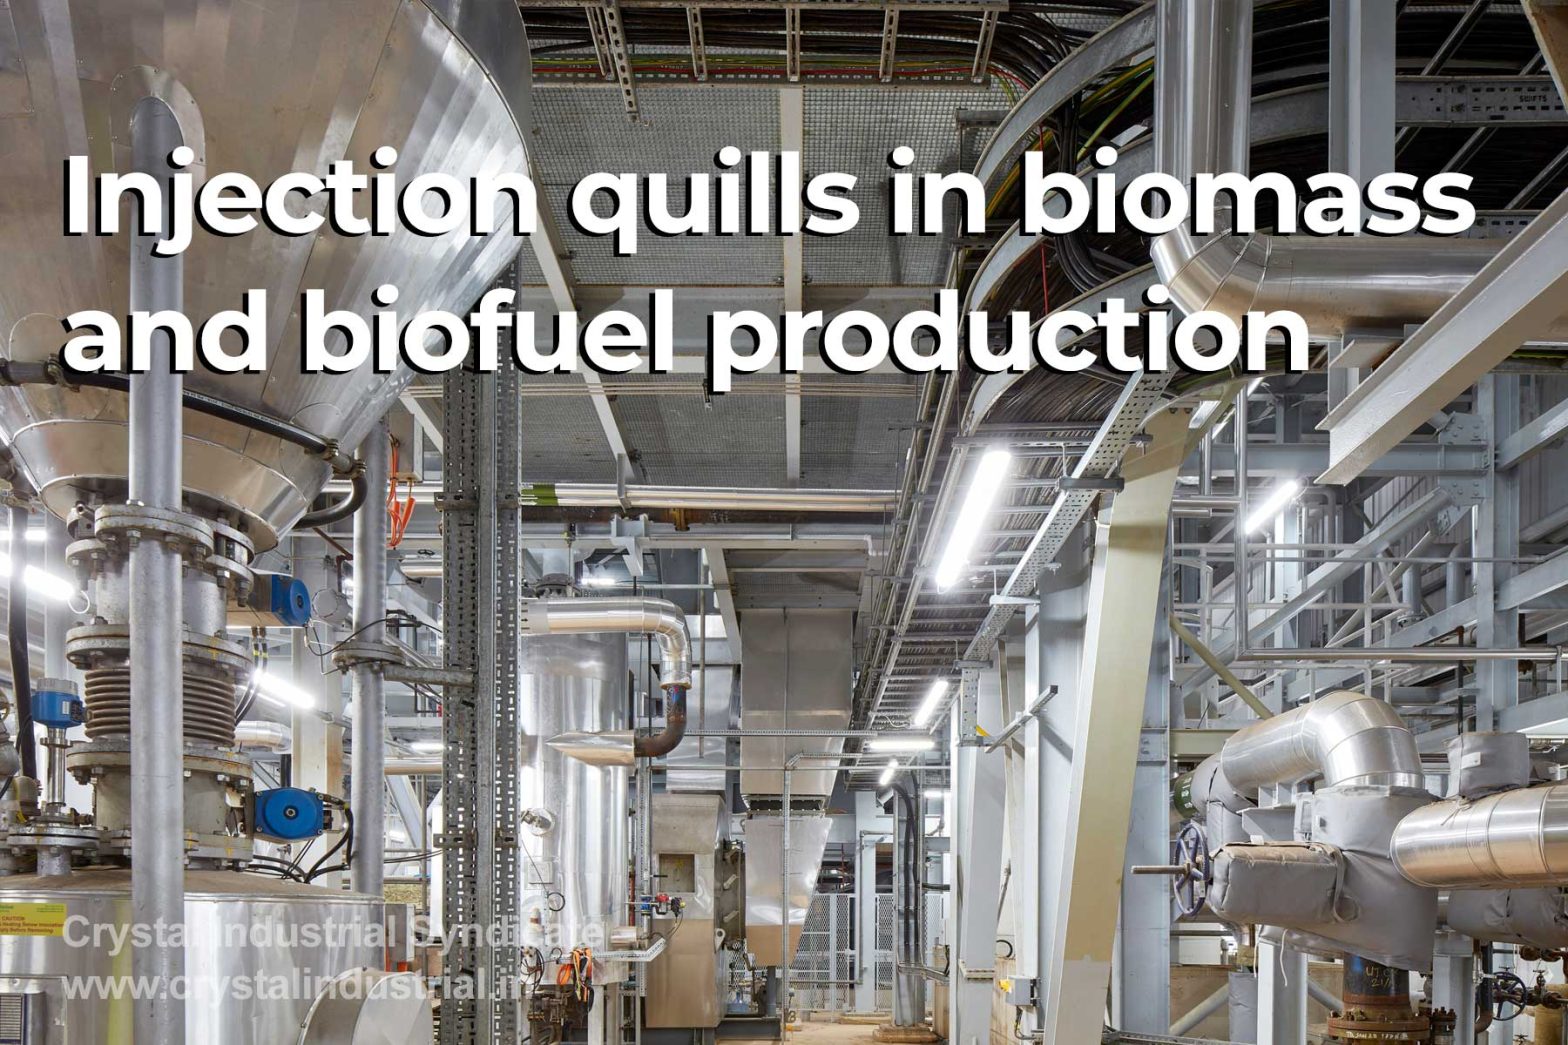 Injection quills in biomass and biofuel production